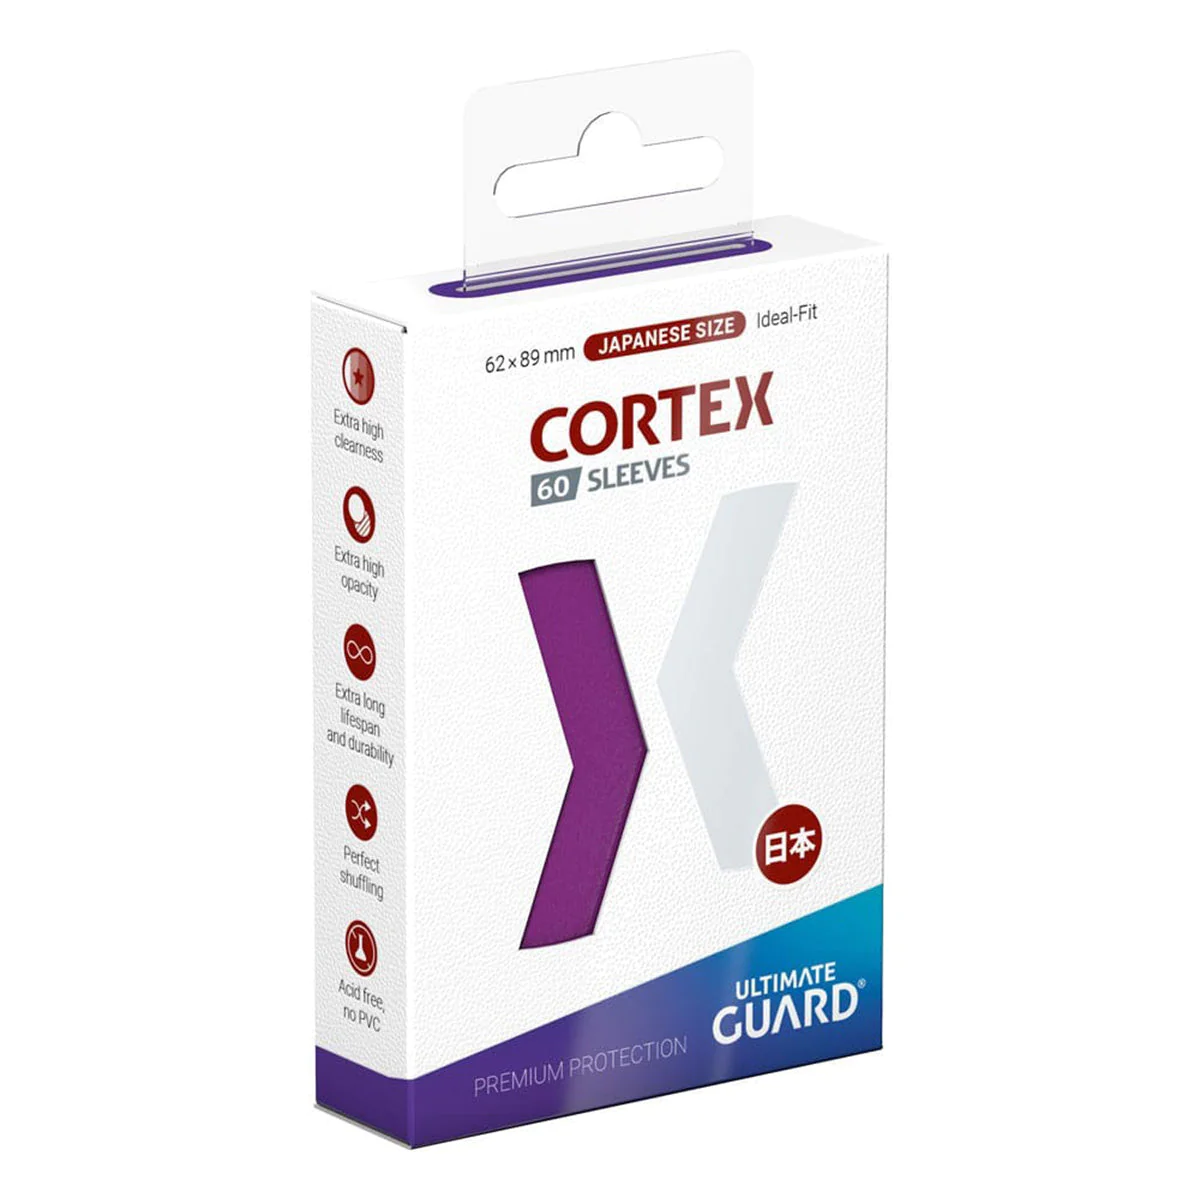 Ultimate Guard Cortex Sleeves Japanese Size Purple 60ct